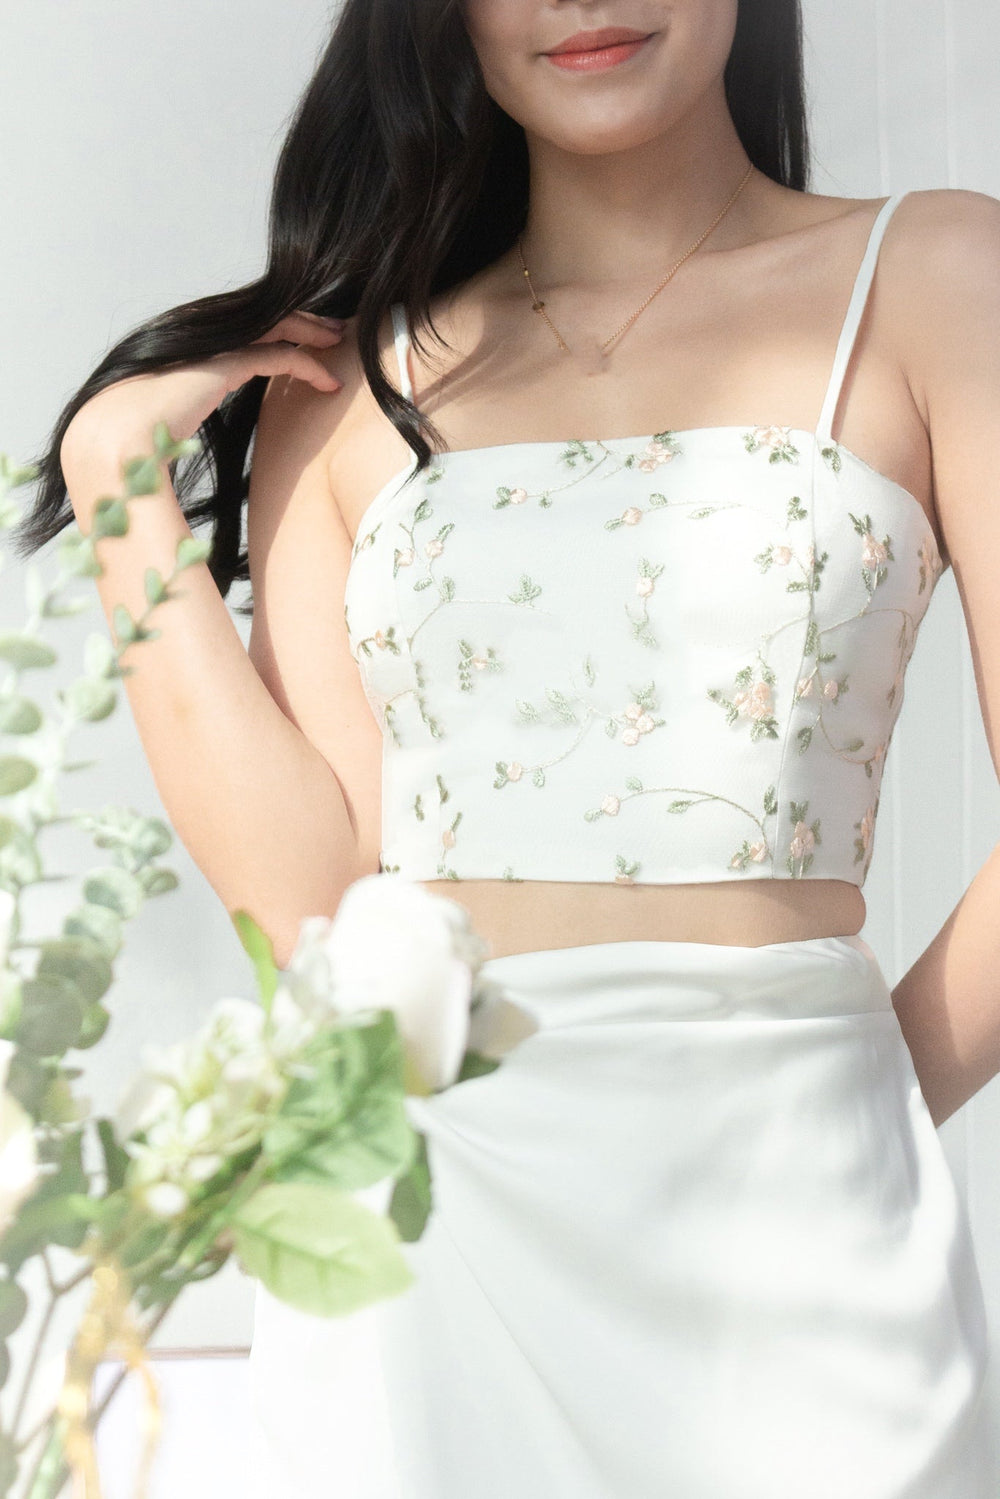 Blossom Embroidered Top in White #MadeByKEI